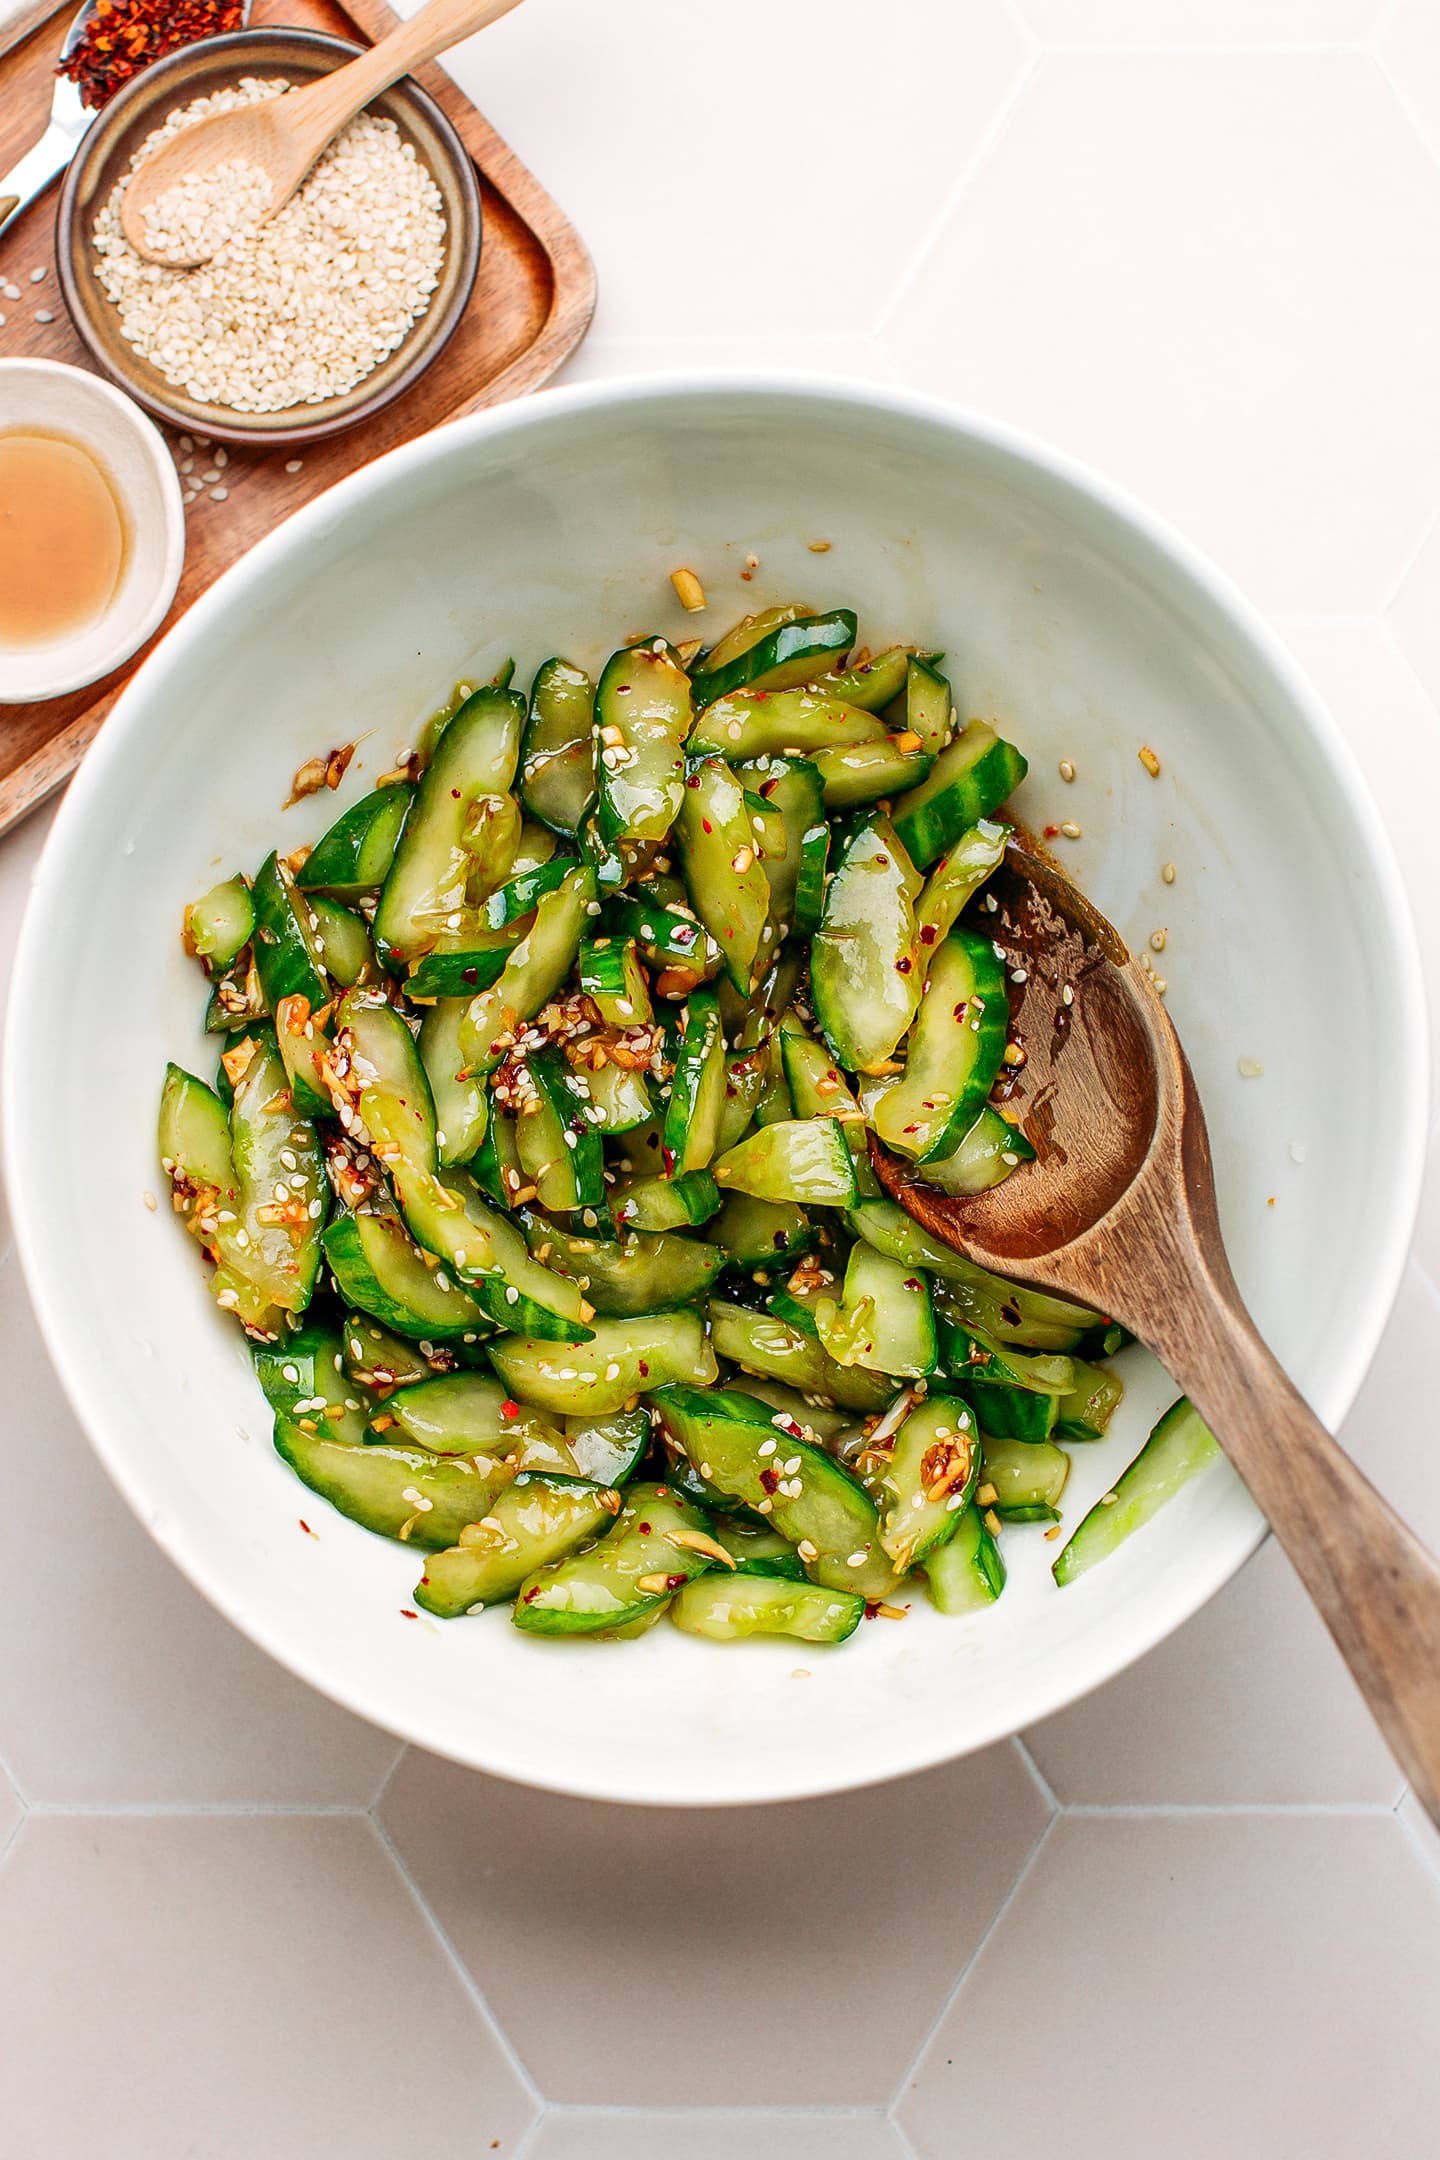 Cucumbers seasoned with soy sauce, sesame oil, and vinegar in a bowl.